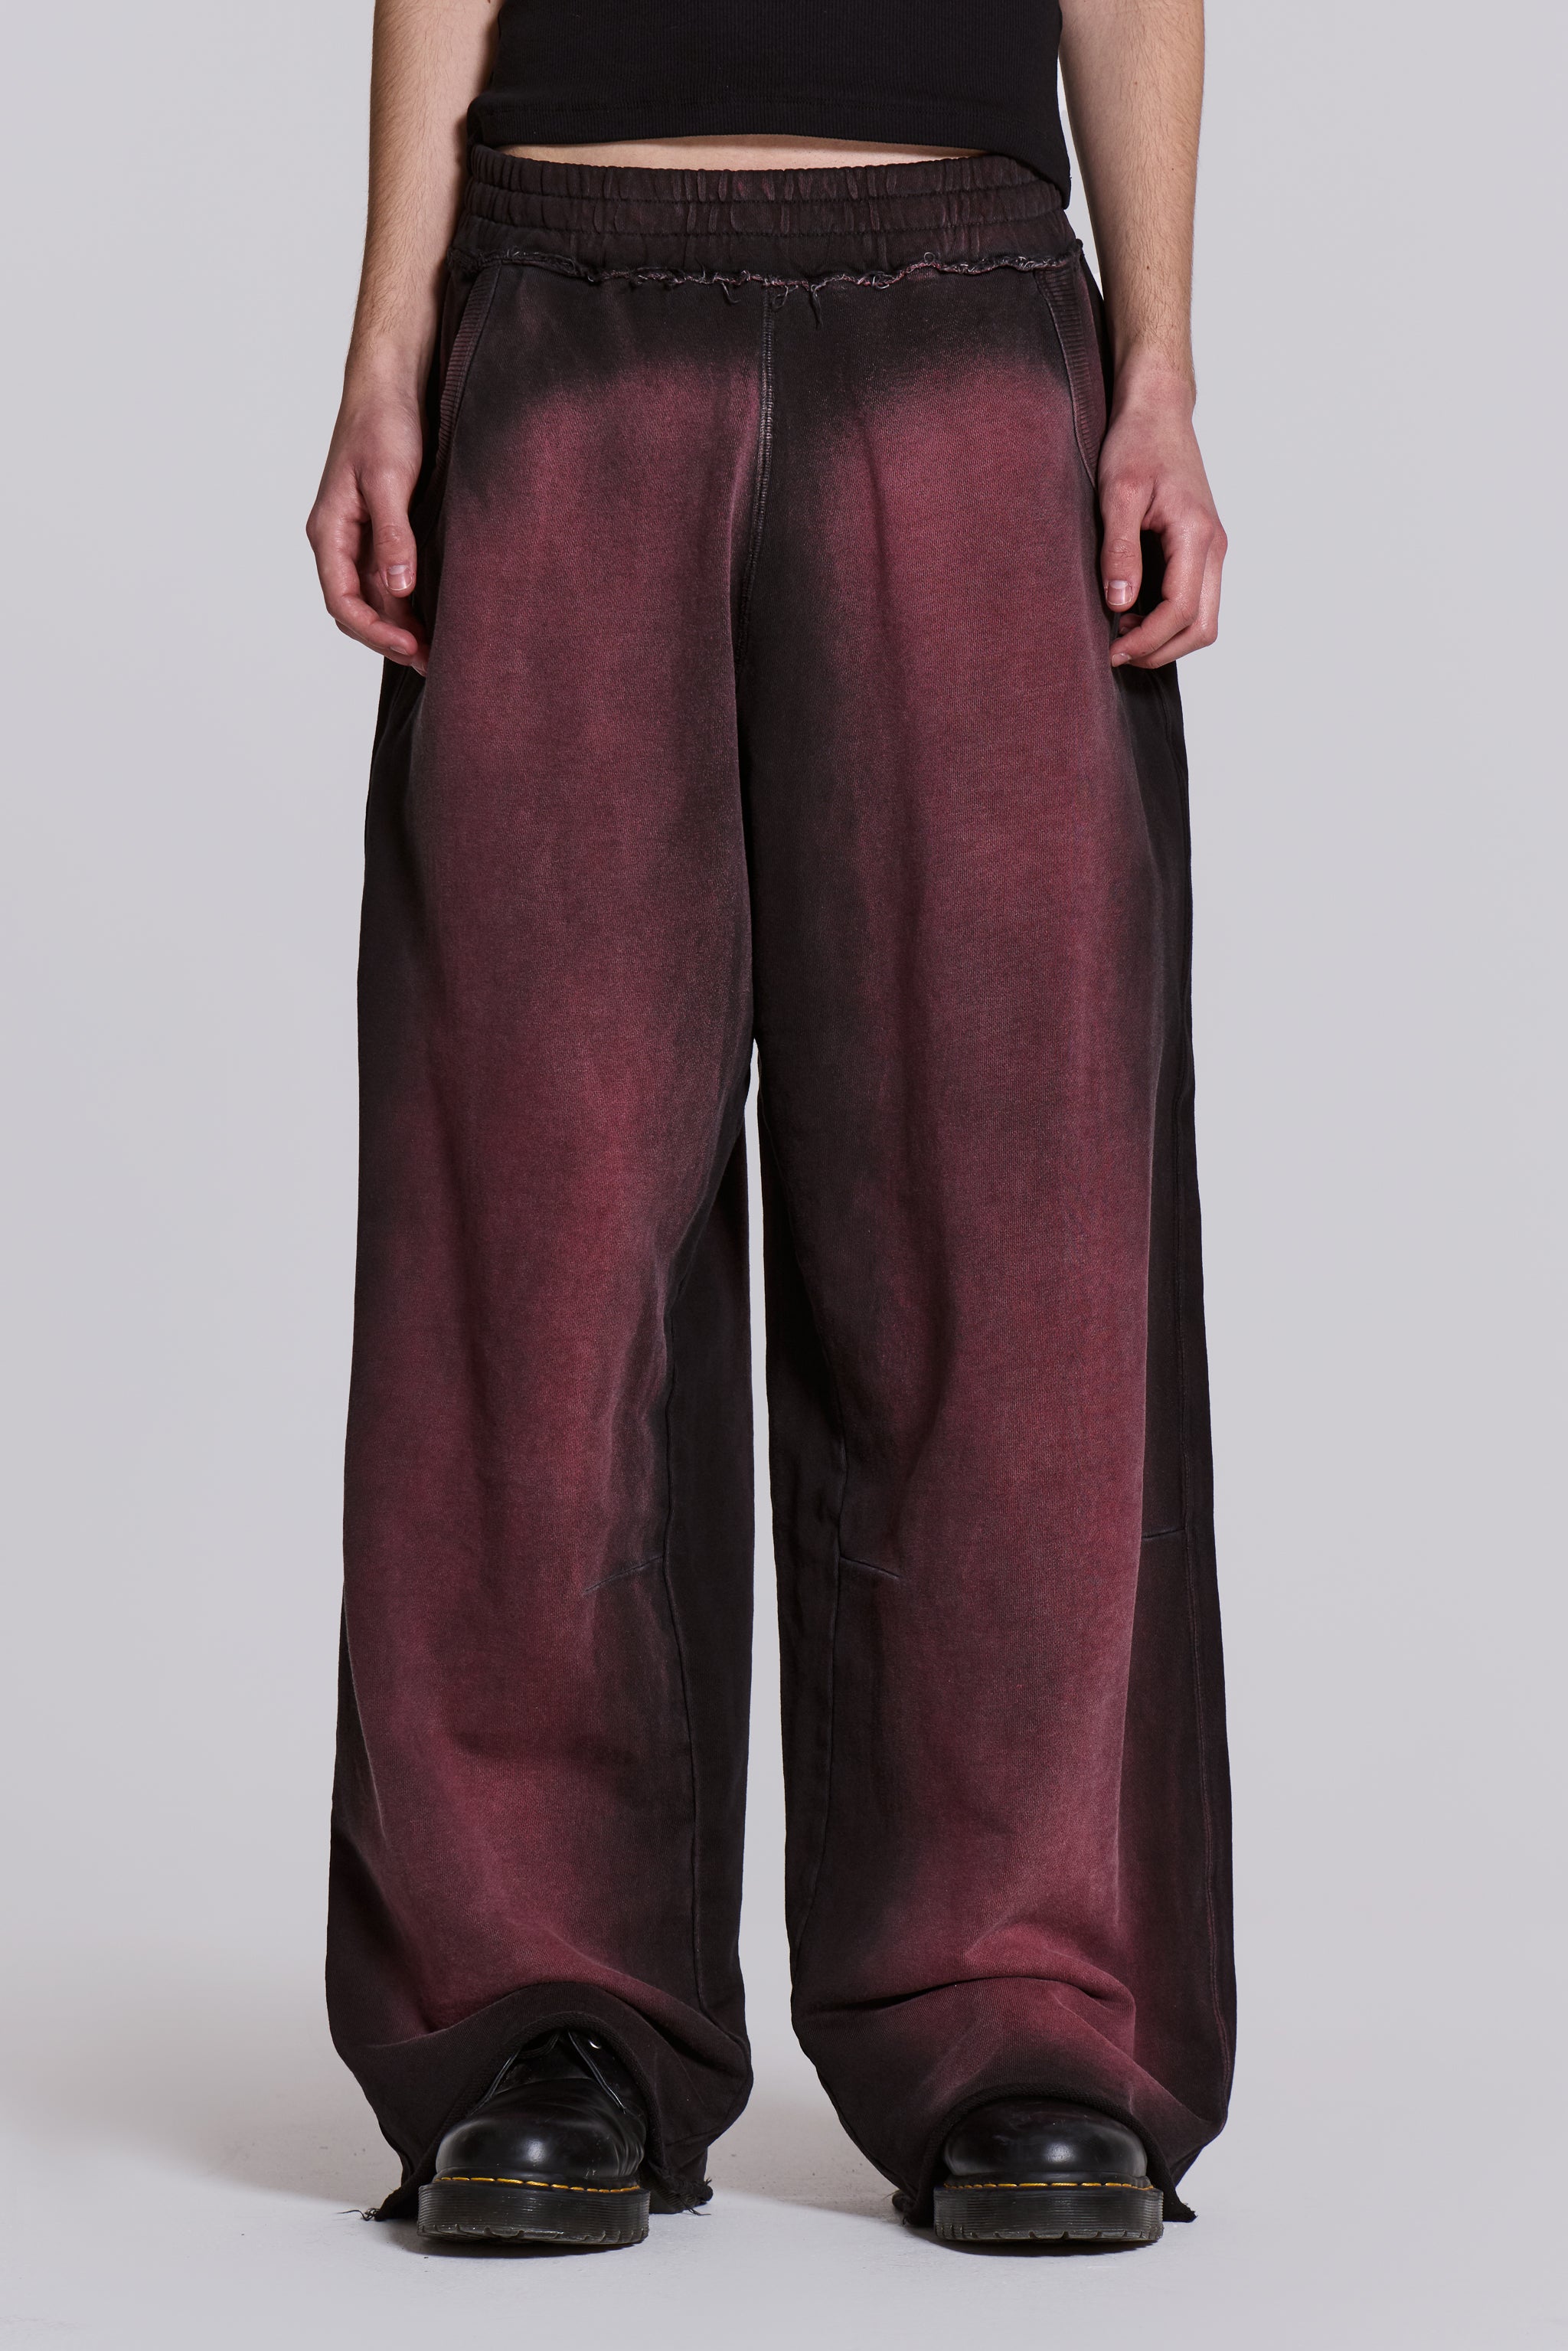 Jaded London Deep Red Fade Monster Joggers